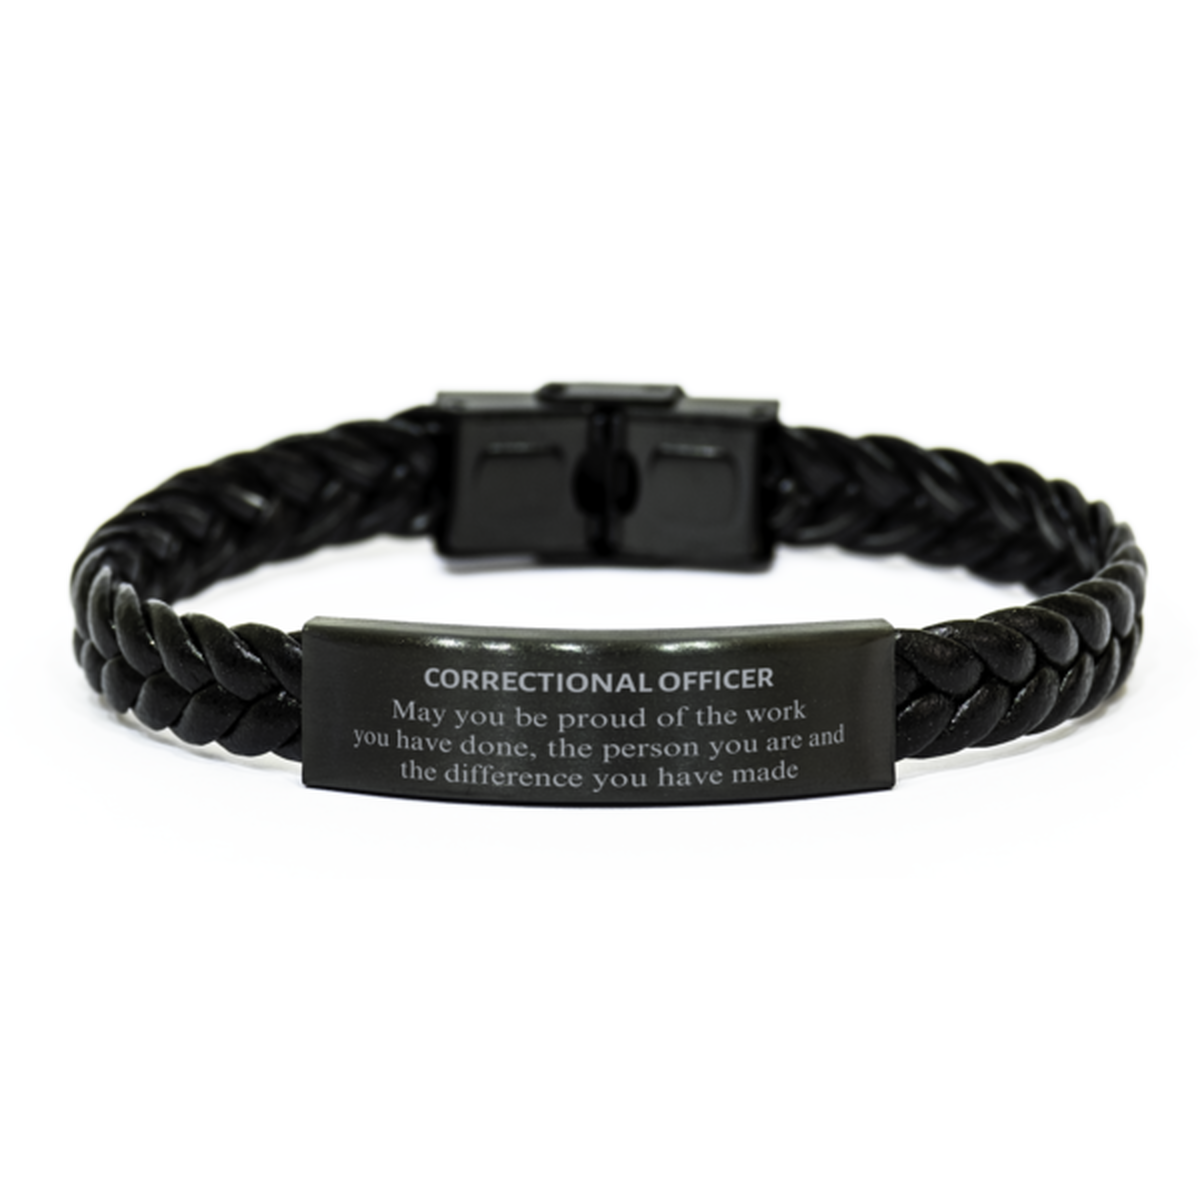 Correctional Officer May you be proud of the work you have done, Retirement Correctional Officer Braided Leather Bracelet for Colleague Appreciation Gifts Amazing for Correctional Officer